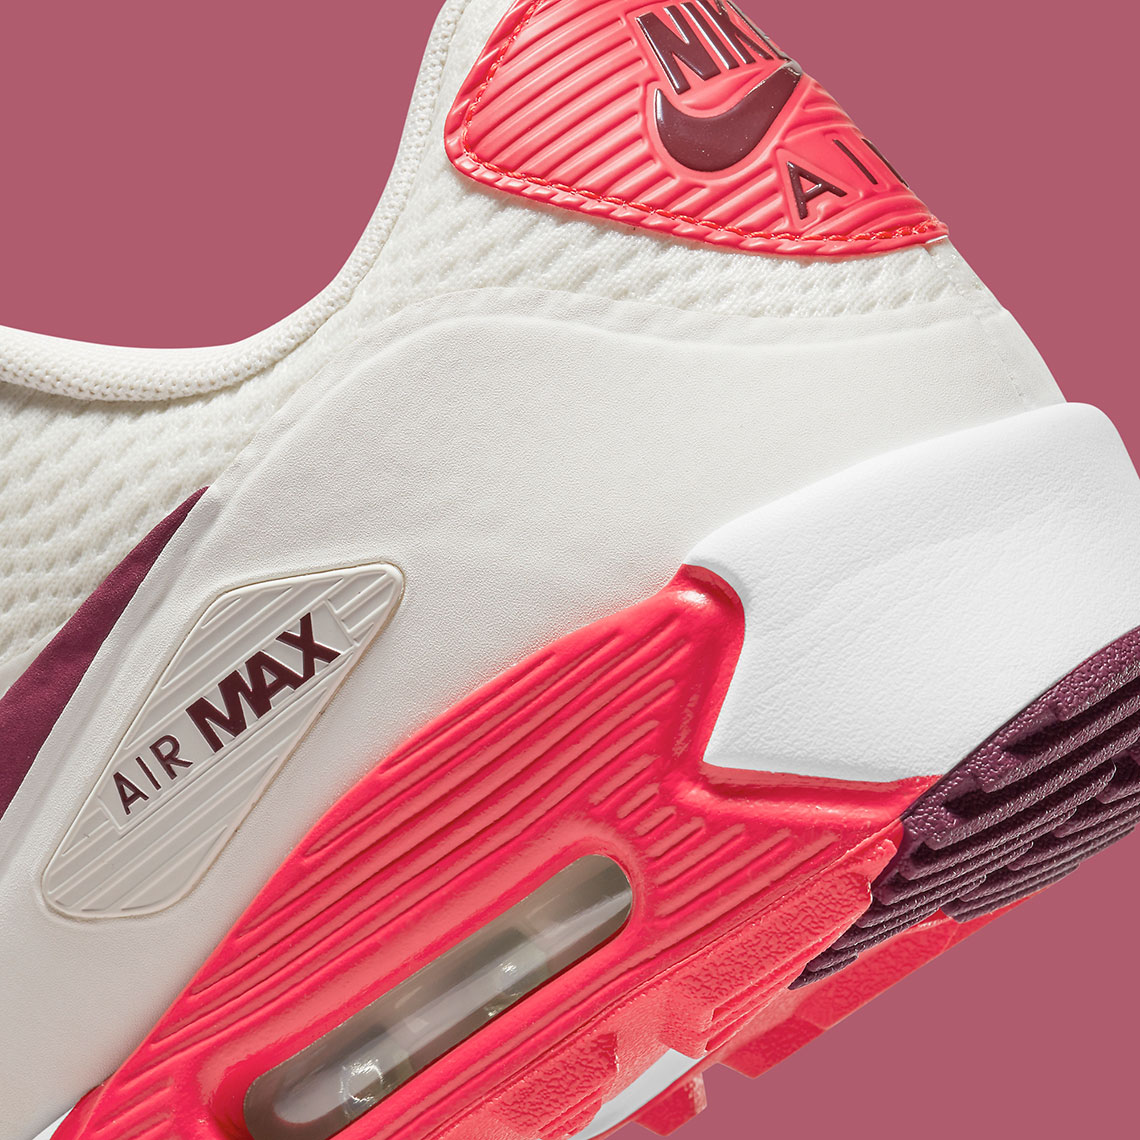 Fusion Red And Dark Beetroot Touches Dress Up The Nike Air Max 90 G Golf 8